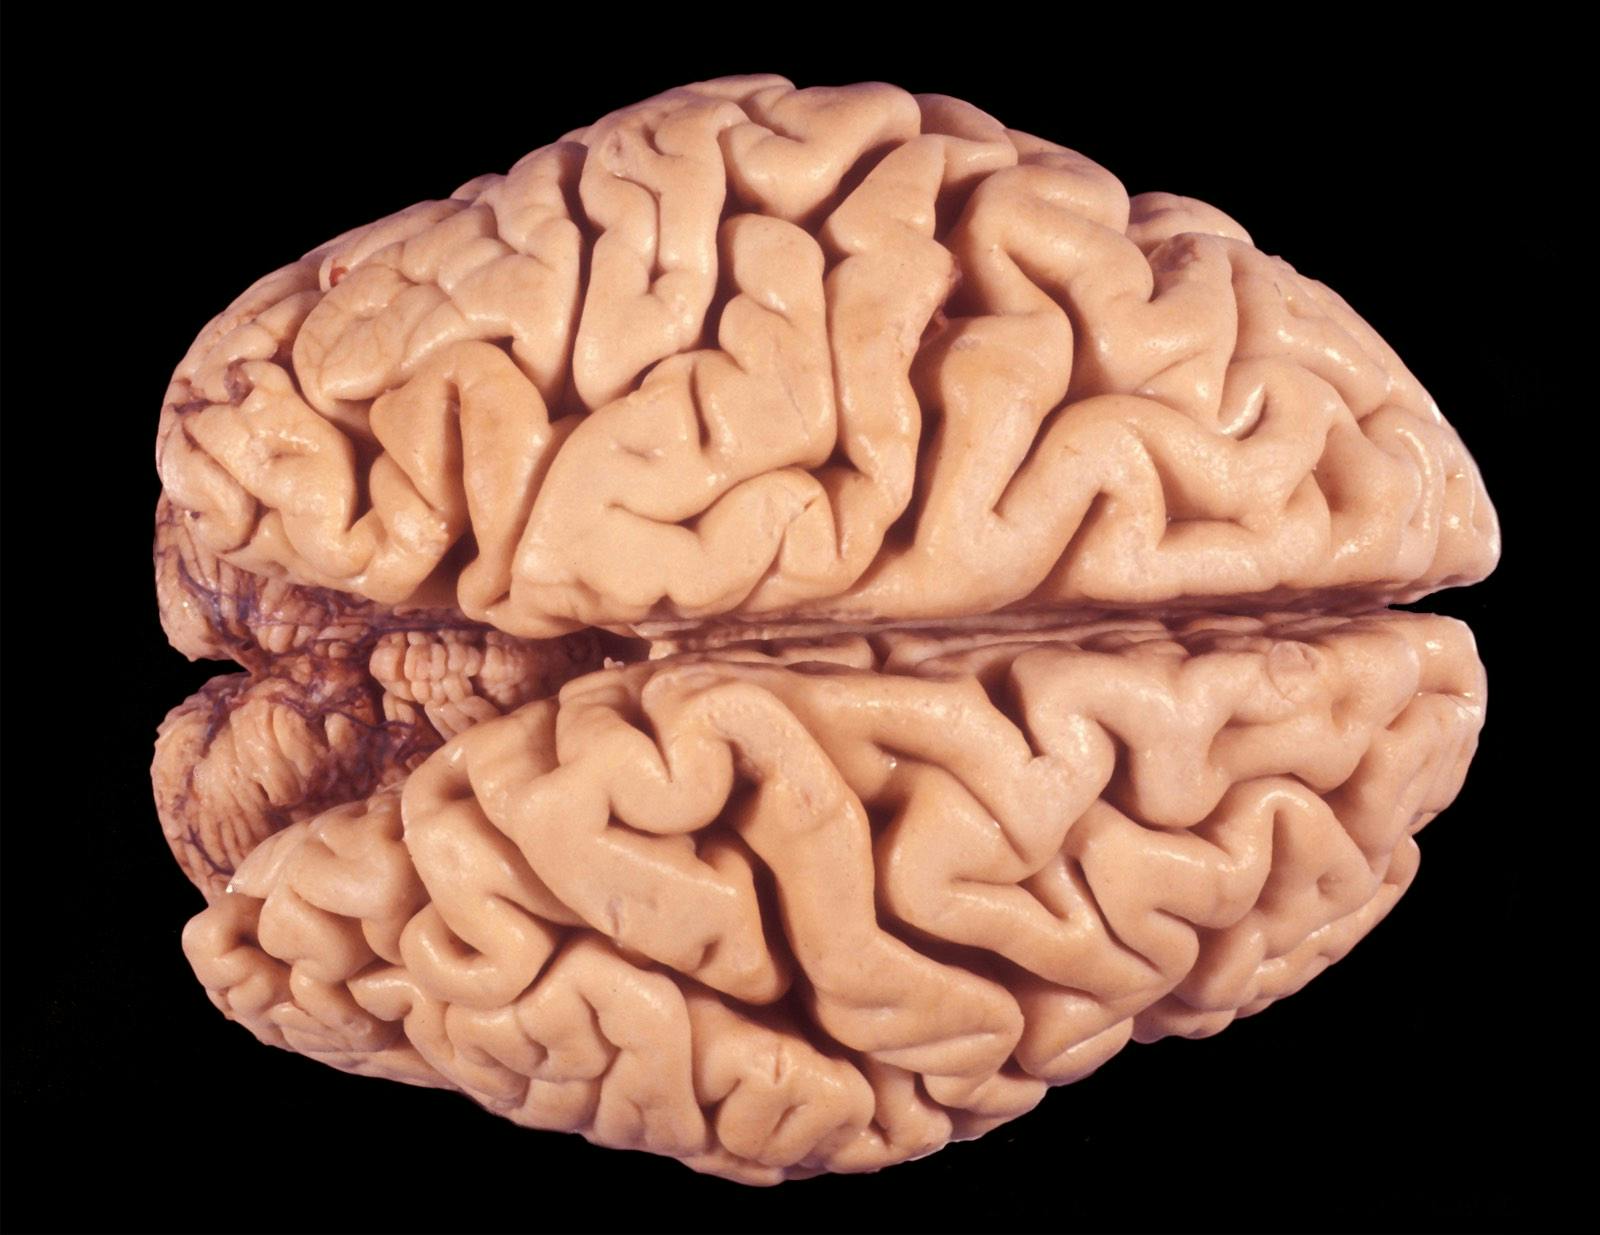 Gross anatomy of the dorsal surface of a human brain (fixed in formalin) showing a severe cortical atrophy with enlarged sulci and reduced giri. This aspect can be seen in Alzheimer disease or senile brain.
